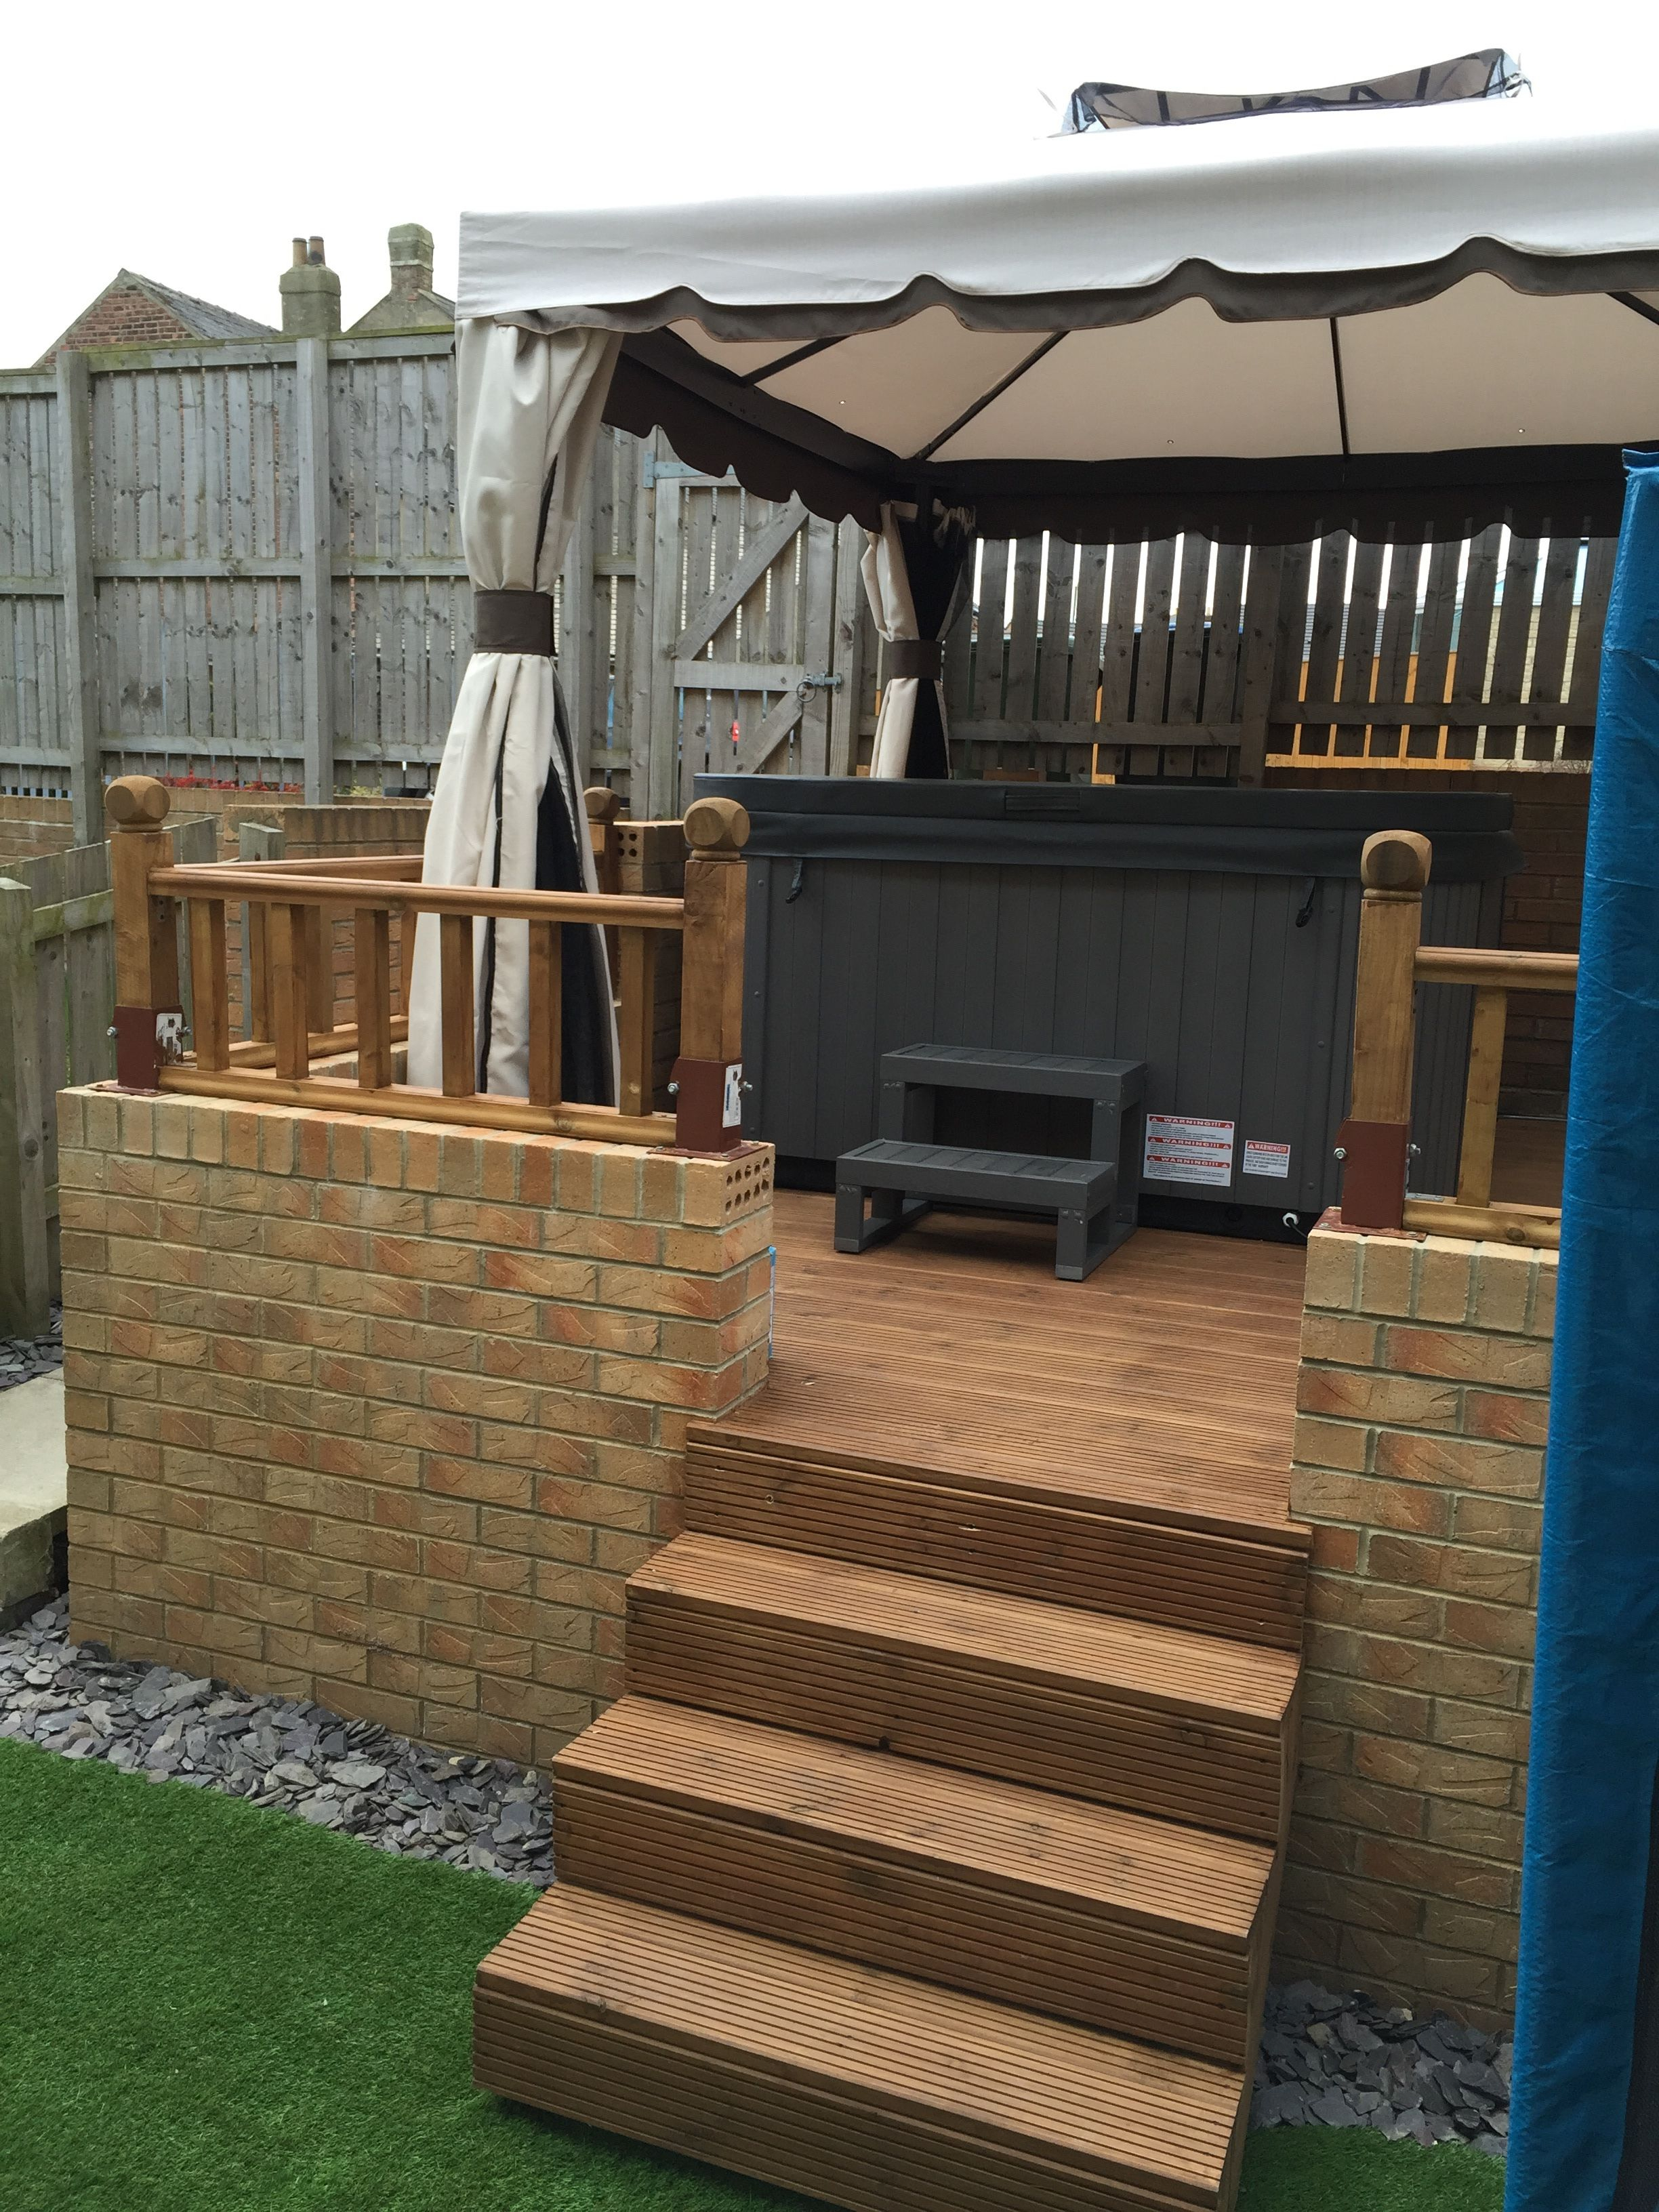 Hot Tub Positioned On Raised Reinforced Decking With Steps Brick in dimensions 2448 X 3264